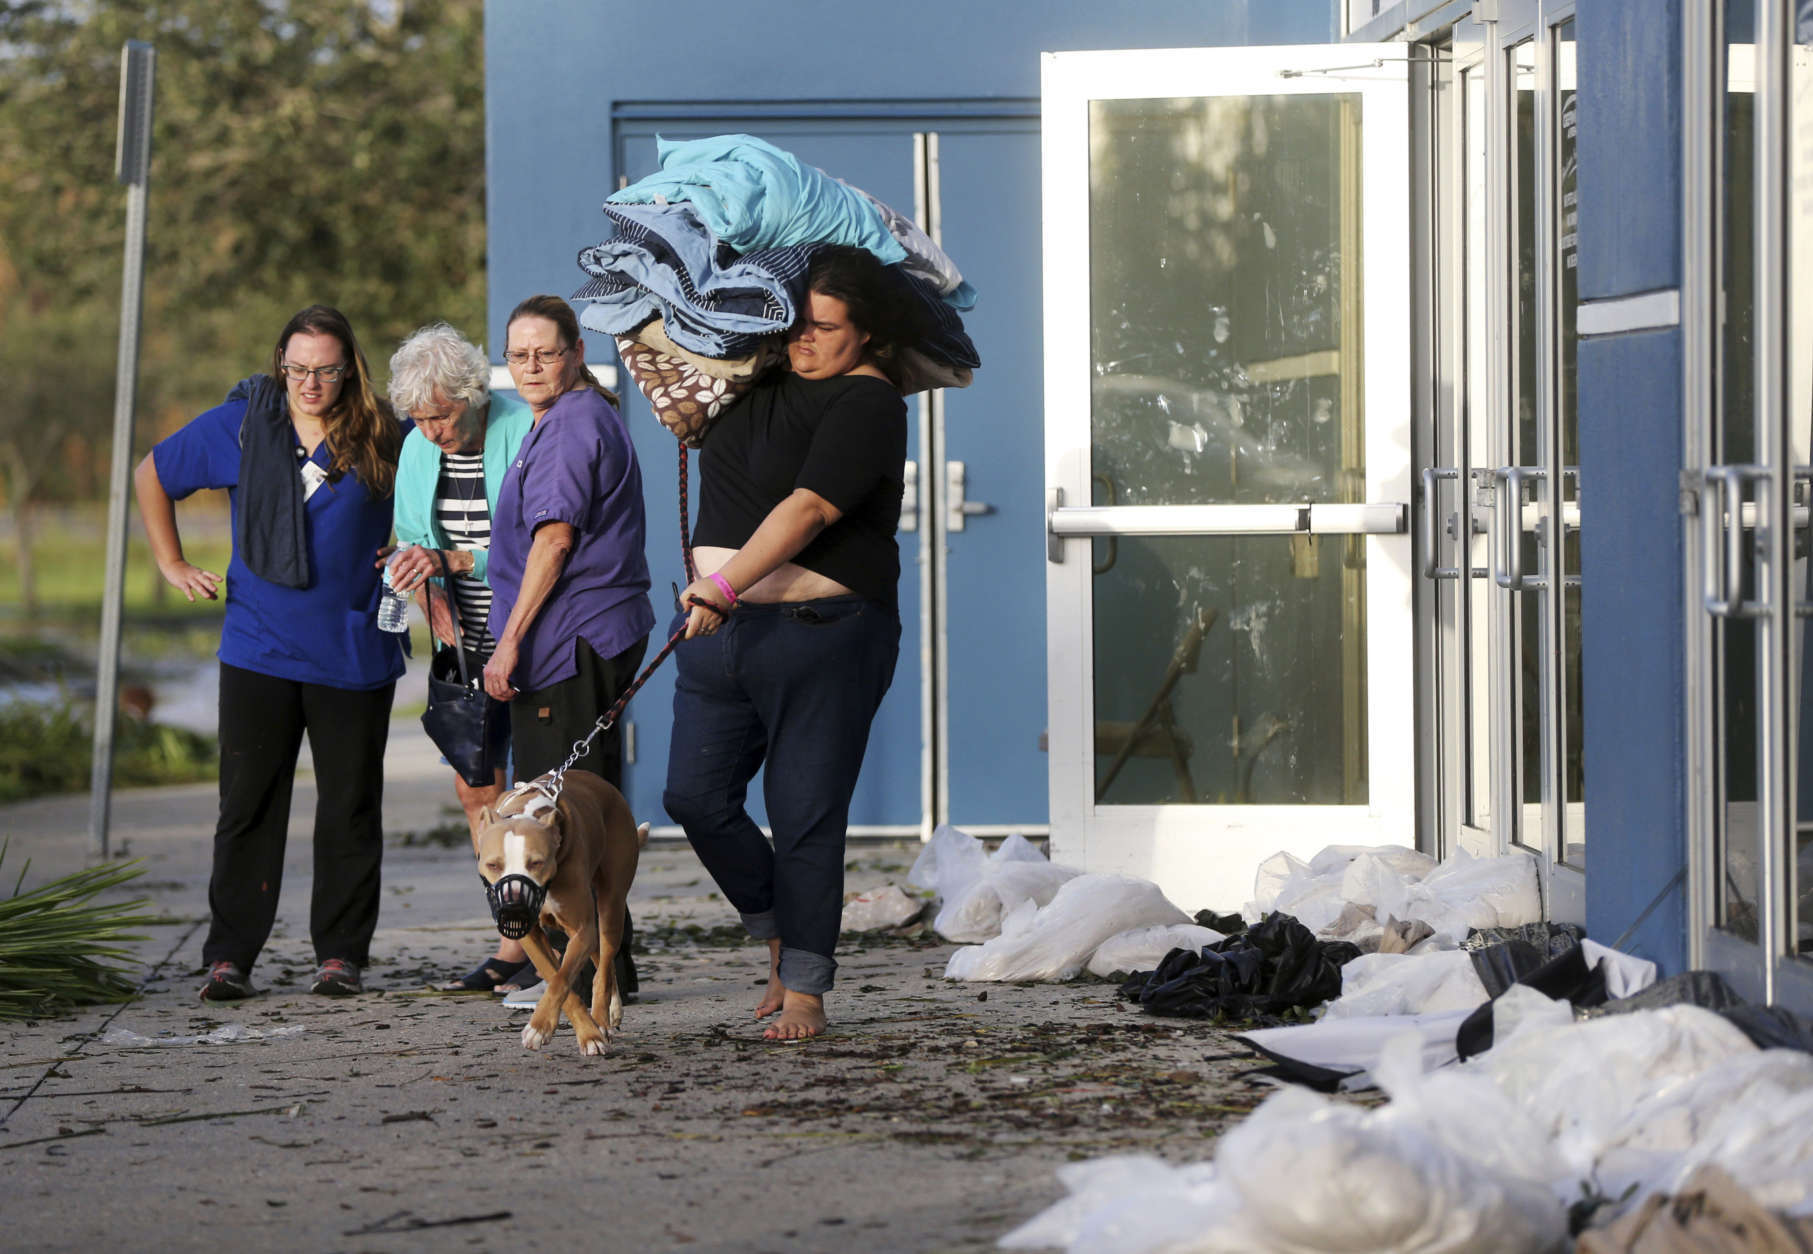 Meghan August leaves the Germain Arena, which was used as an evacuation shelter for Hurricane Irma, which passed through yesterday, in Estero, Fla., Monday, Sept. 11, 2017. (AP Photo/Gerald Herbert)